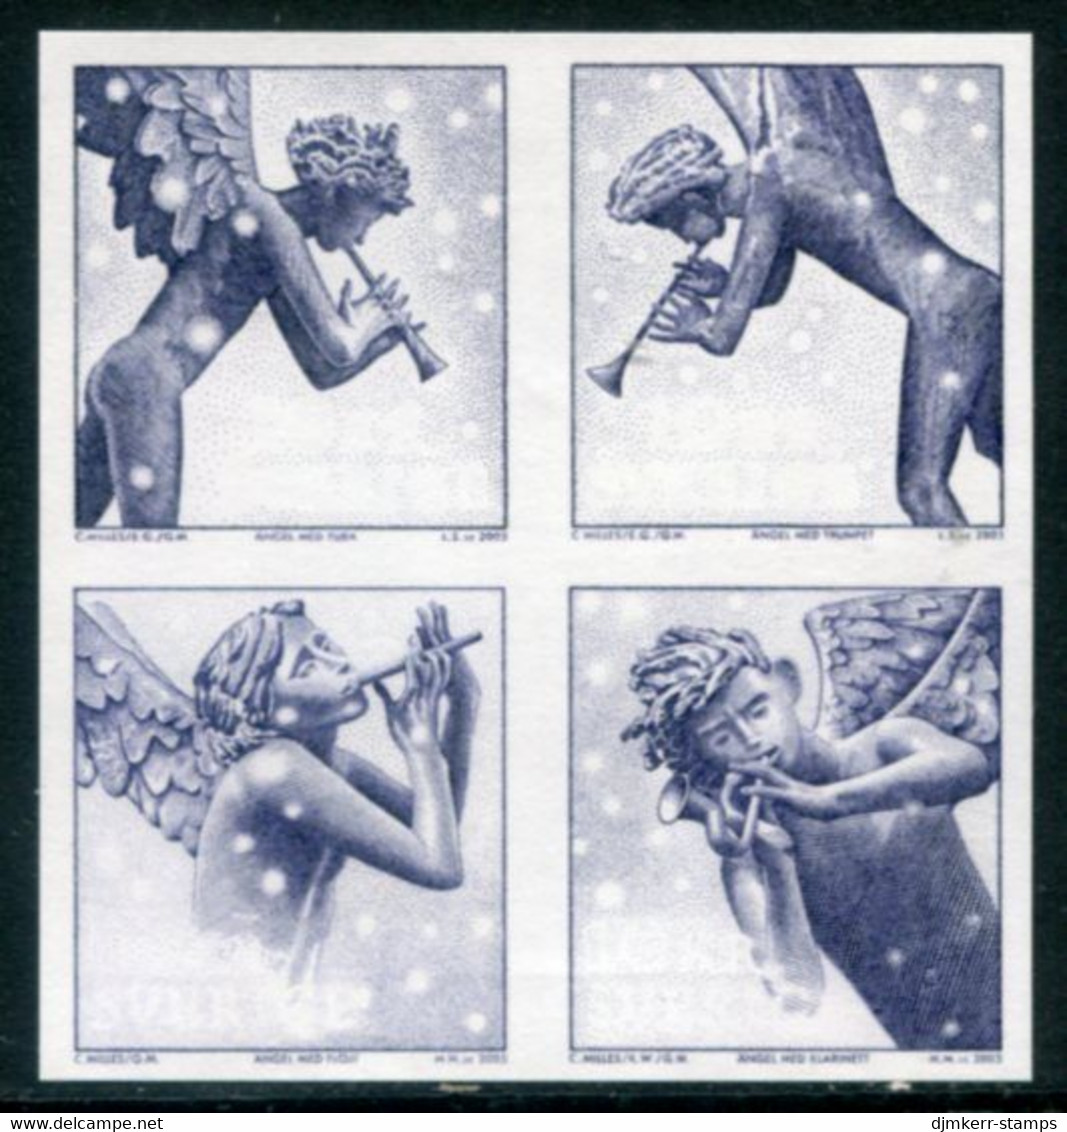 SWEDEN 2005 Christmas Angels Imperforate Proof MNH / **...  As Michel 2506-09 - Ungebraucht